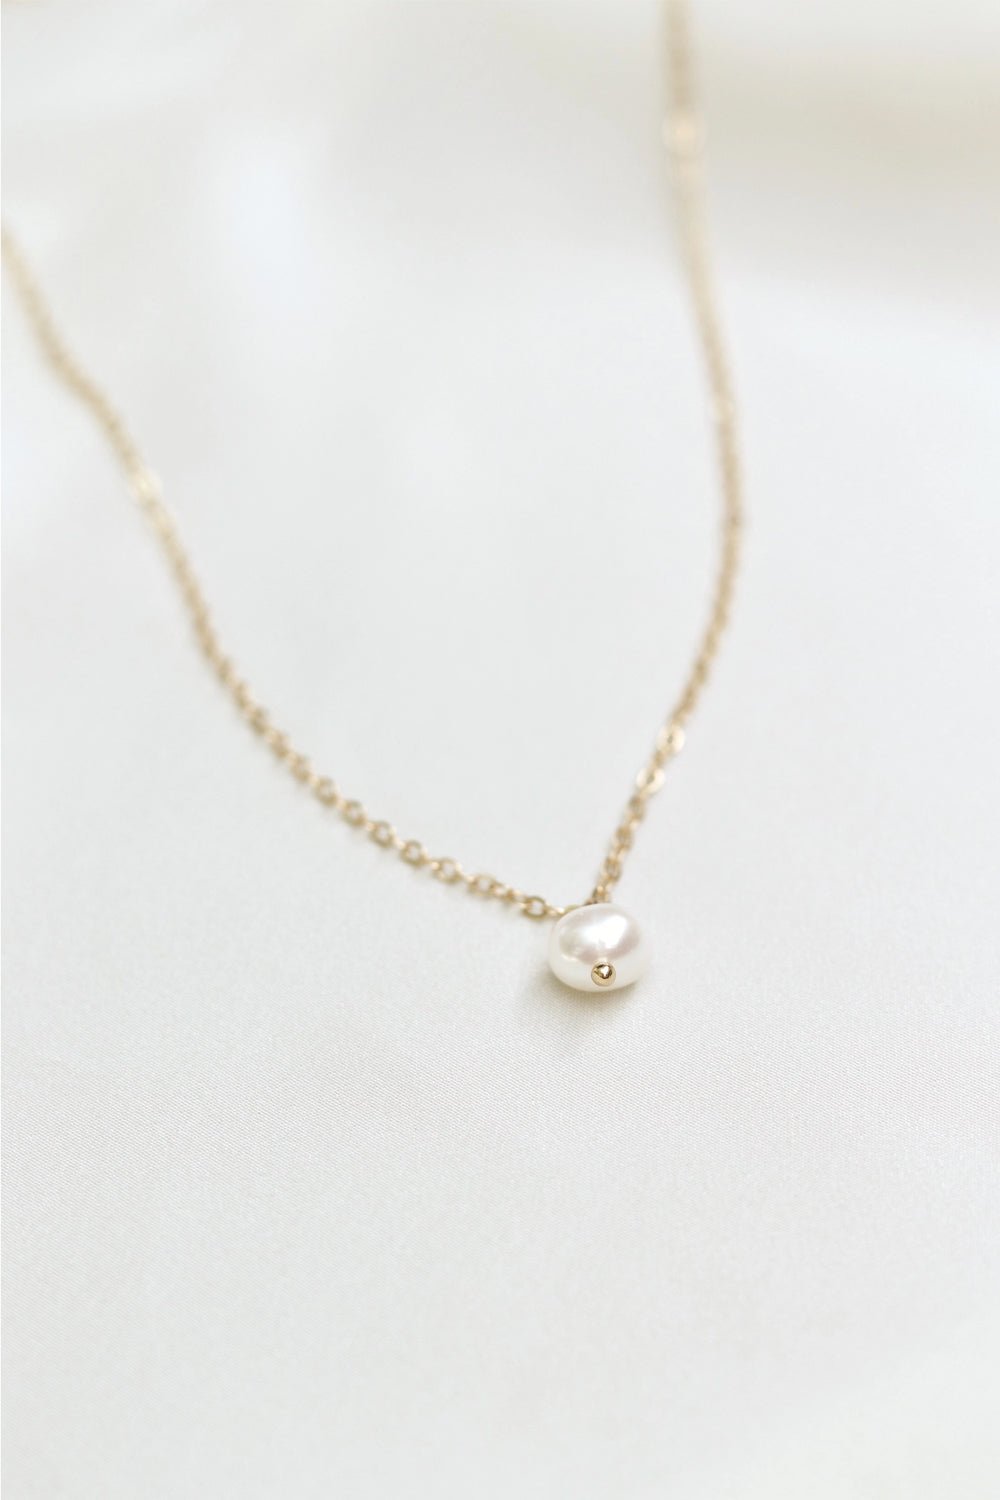 Dainty 14k Gold Circle Necklace with Pearl, Gold Pearl Jewelry, Solid  Minimal Pearl Pendant